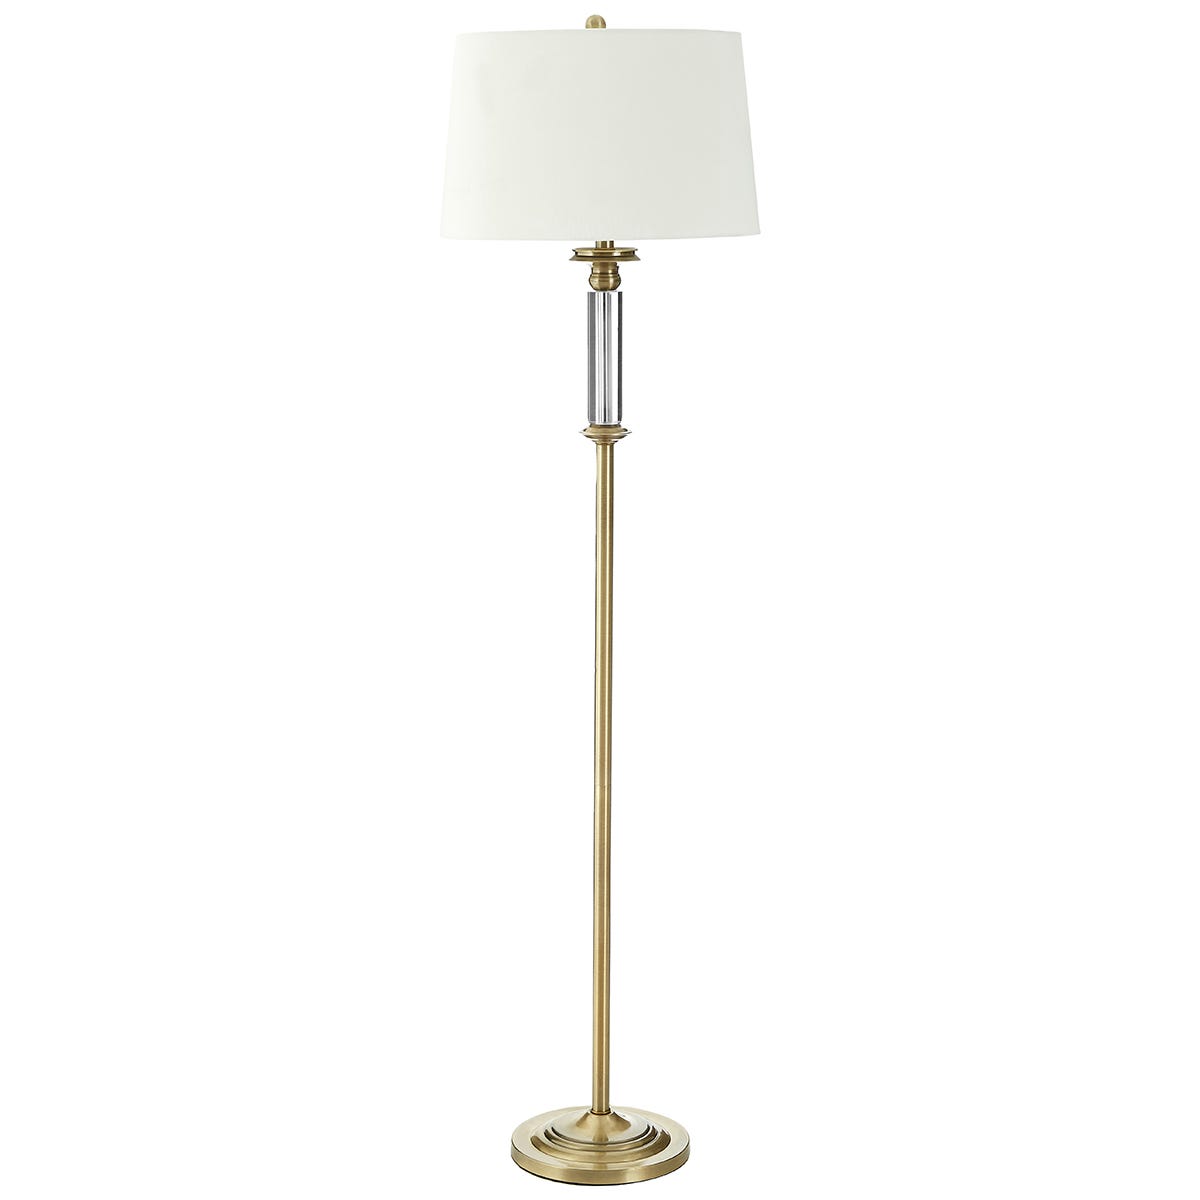 Premier Housewares Grand Northern Floor Lamp with Crystals & Metal Base + Cream Fabric Shade